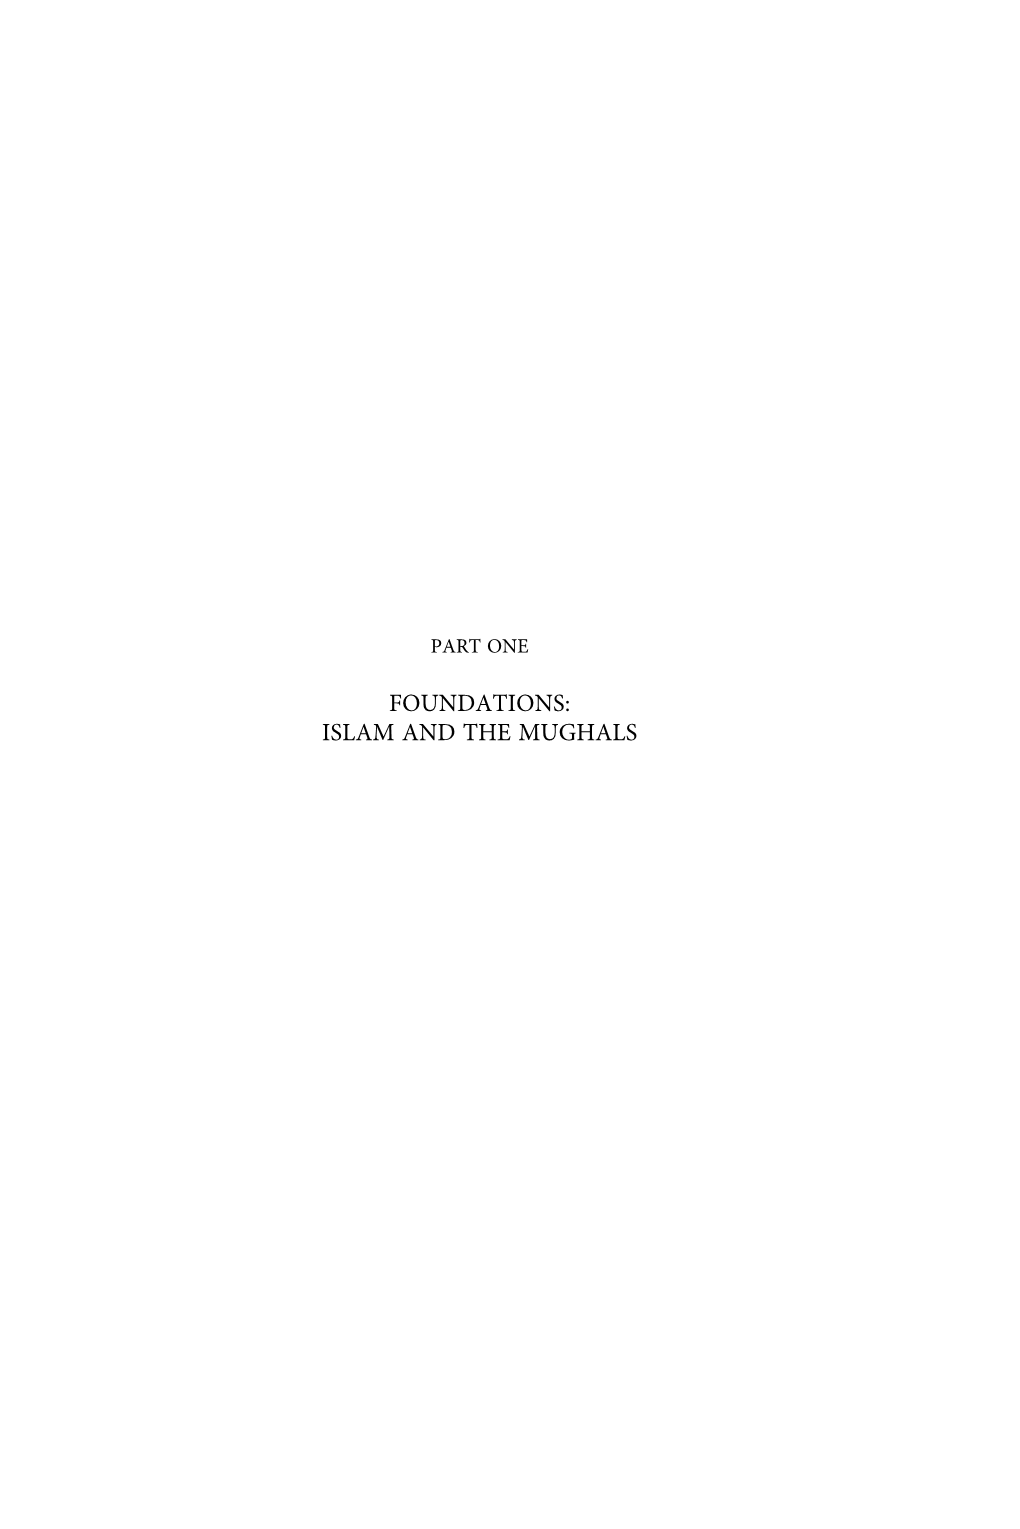 Islam and the Mughals Chapter One